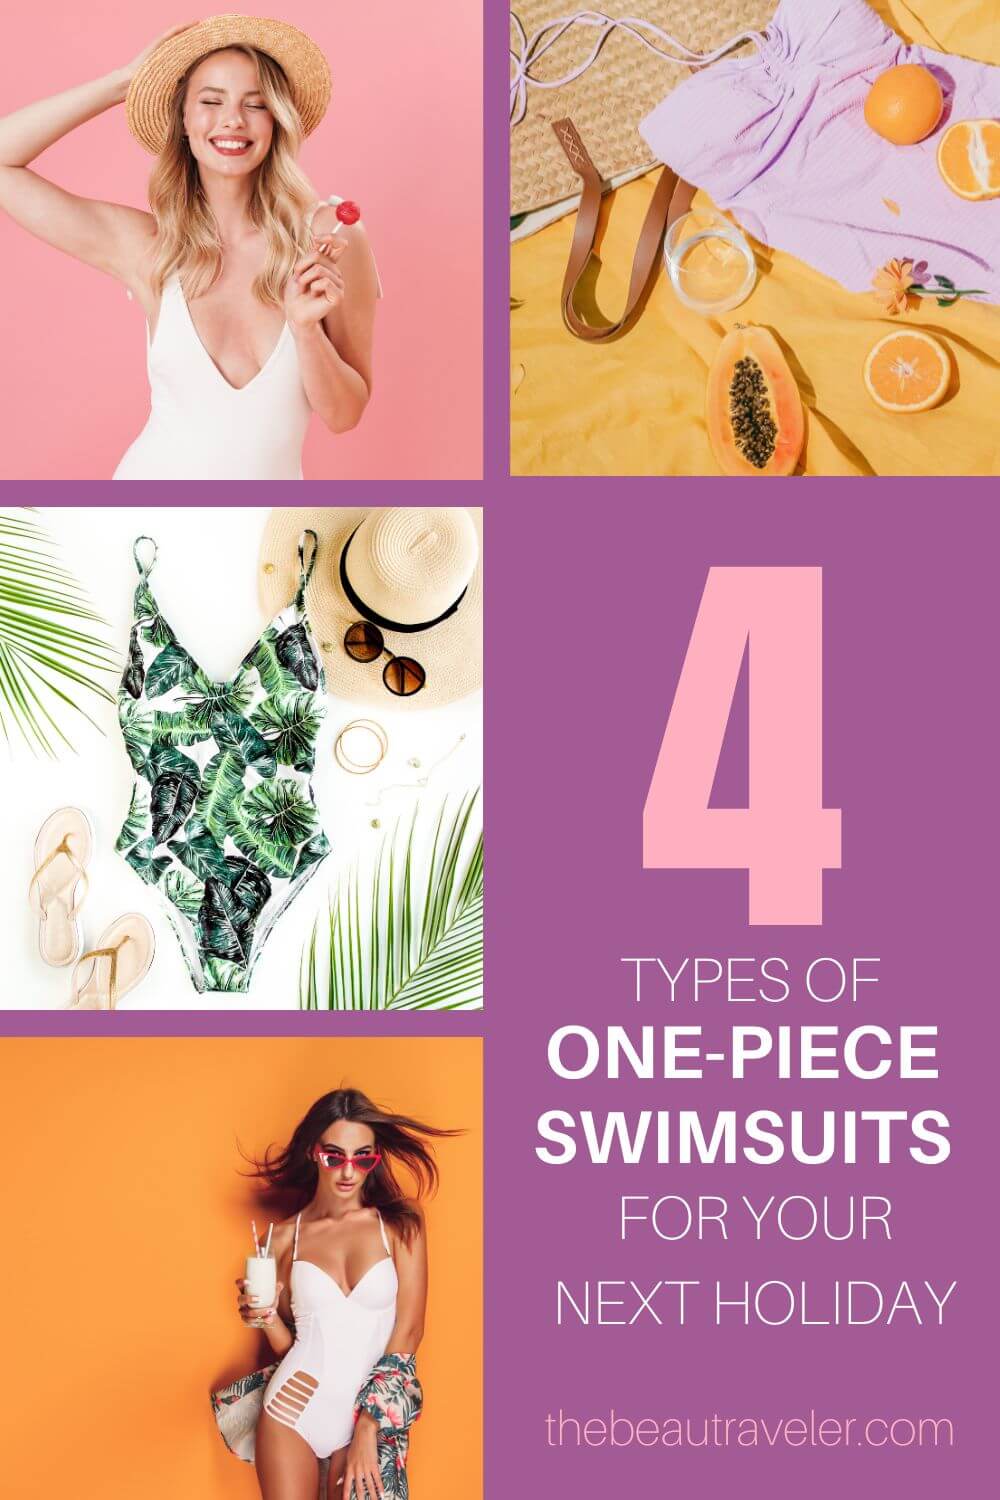 One-Piece Swimsuits to Pack for Your Next Vacation - The BeauTraveler